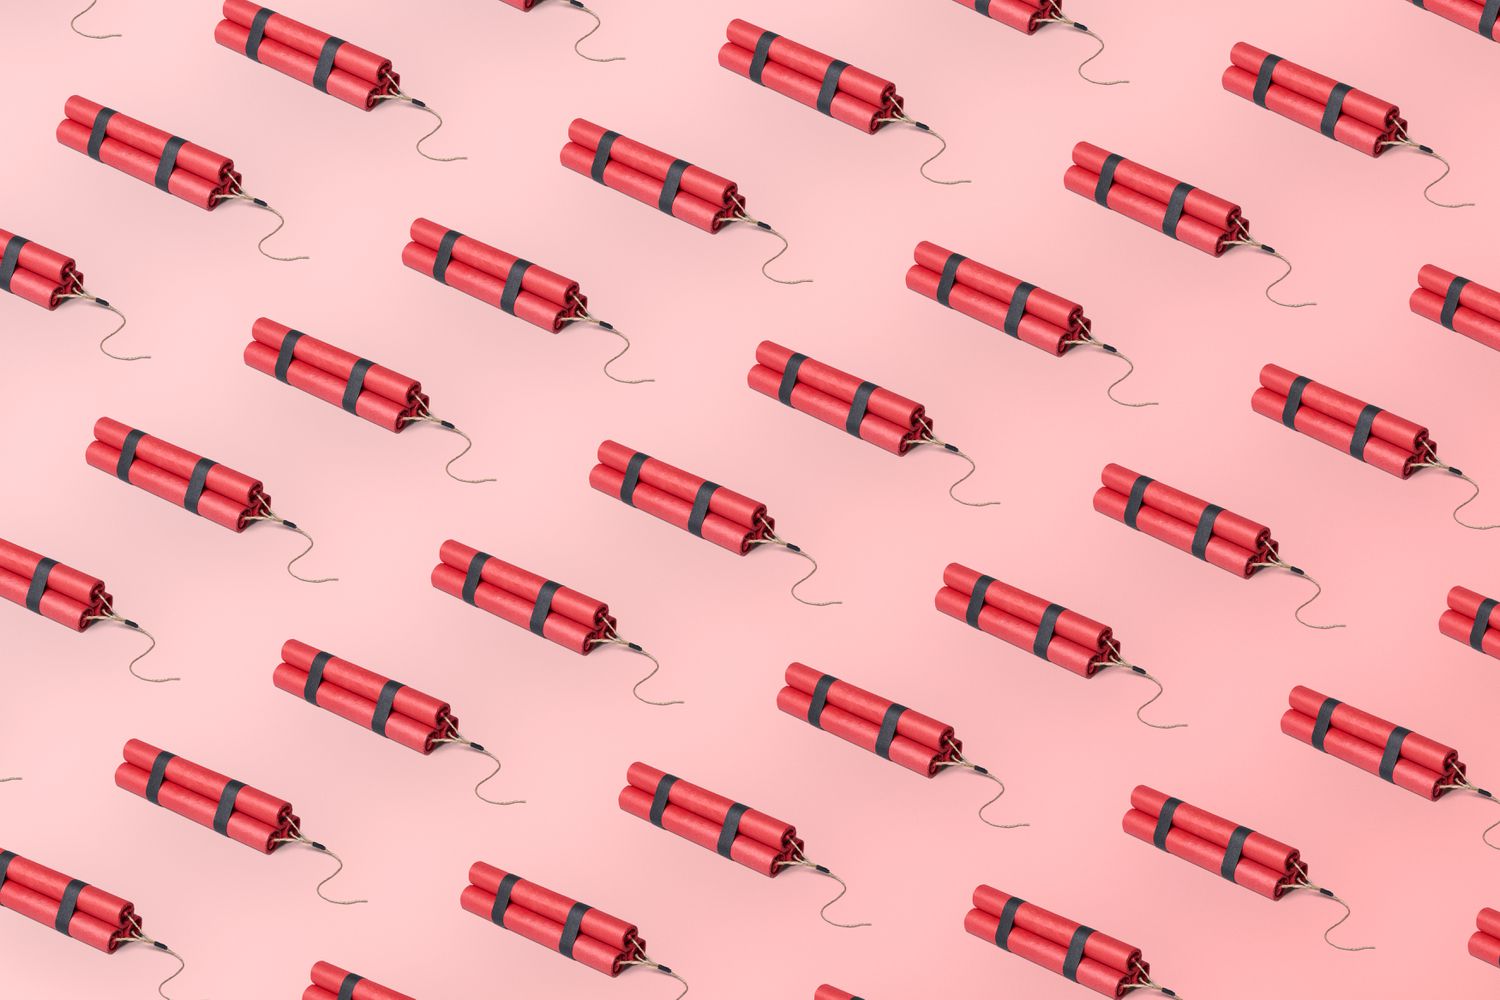 A group of dynamite stick evenly spaced out in a grid pattern on a pastel pink background with a gradient. Image is in a graphic and light-hearted style.